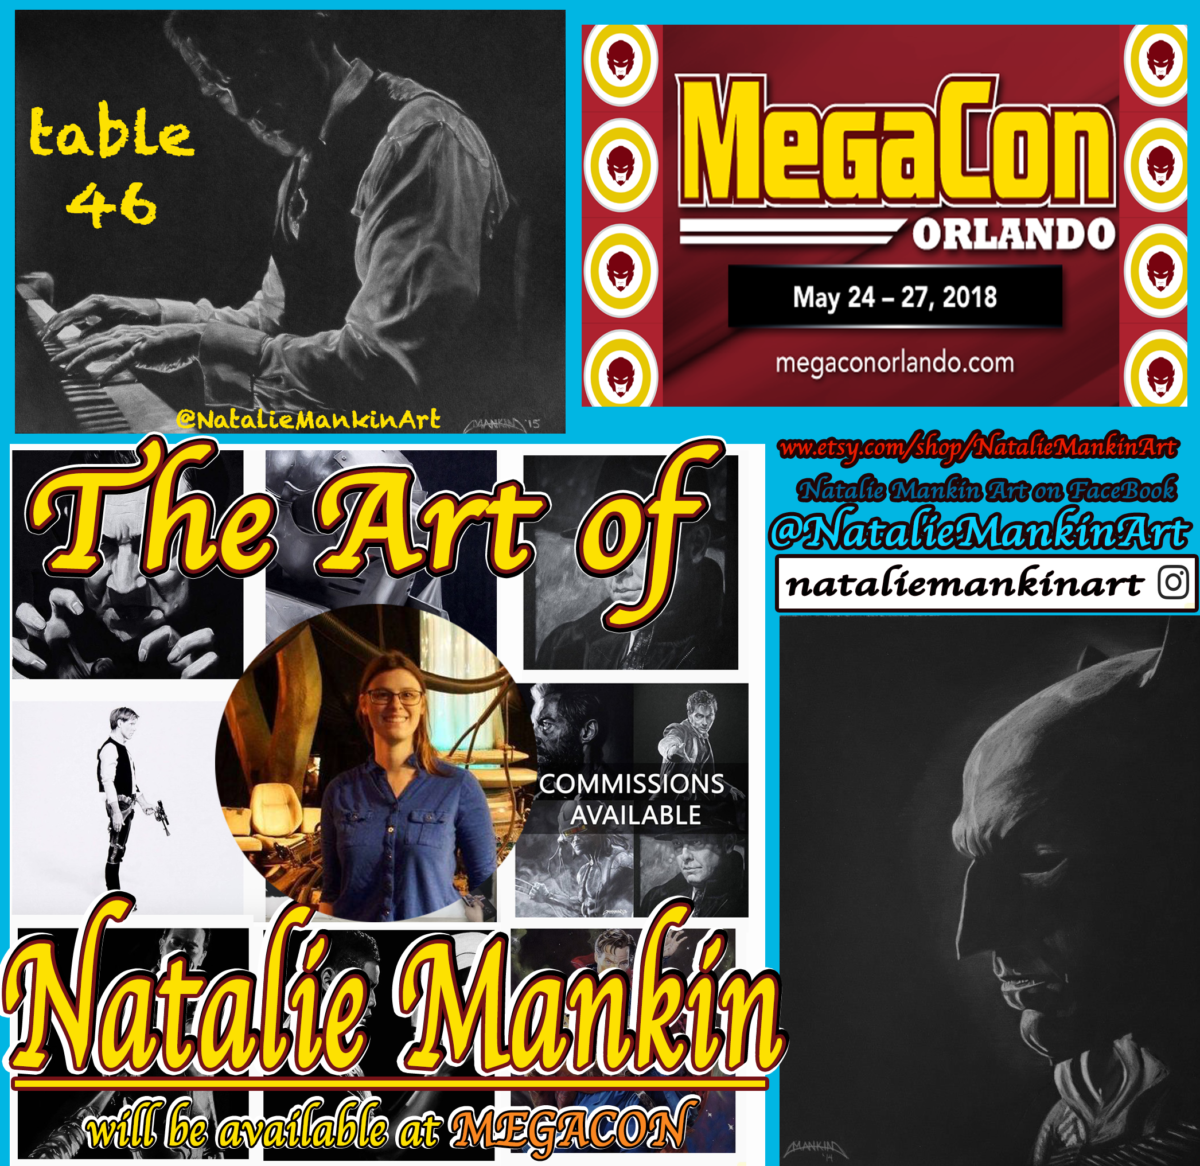 COMIC CON HIGHWAY SOUTHERN EXIT::  -FL-  Natalie Mankin will have her Spectacular art at MegaCon in ORLANDO on May 24-27 at table 46 a